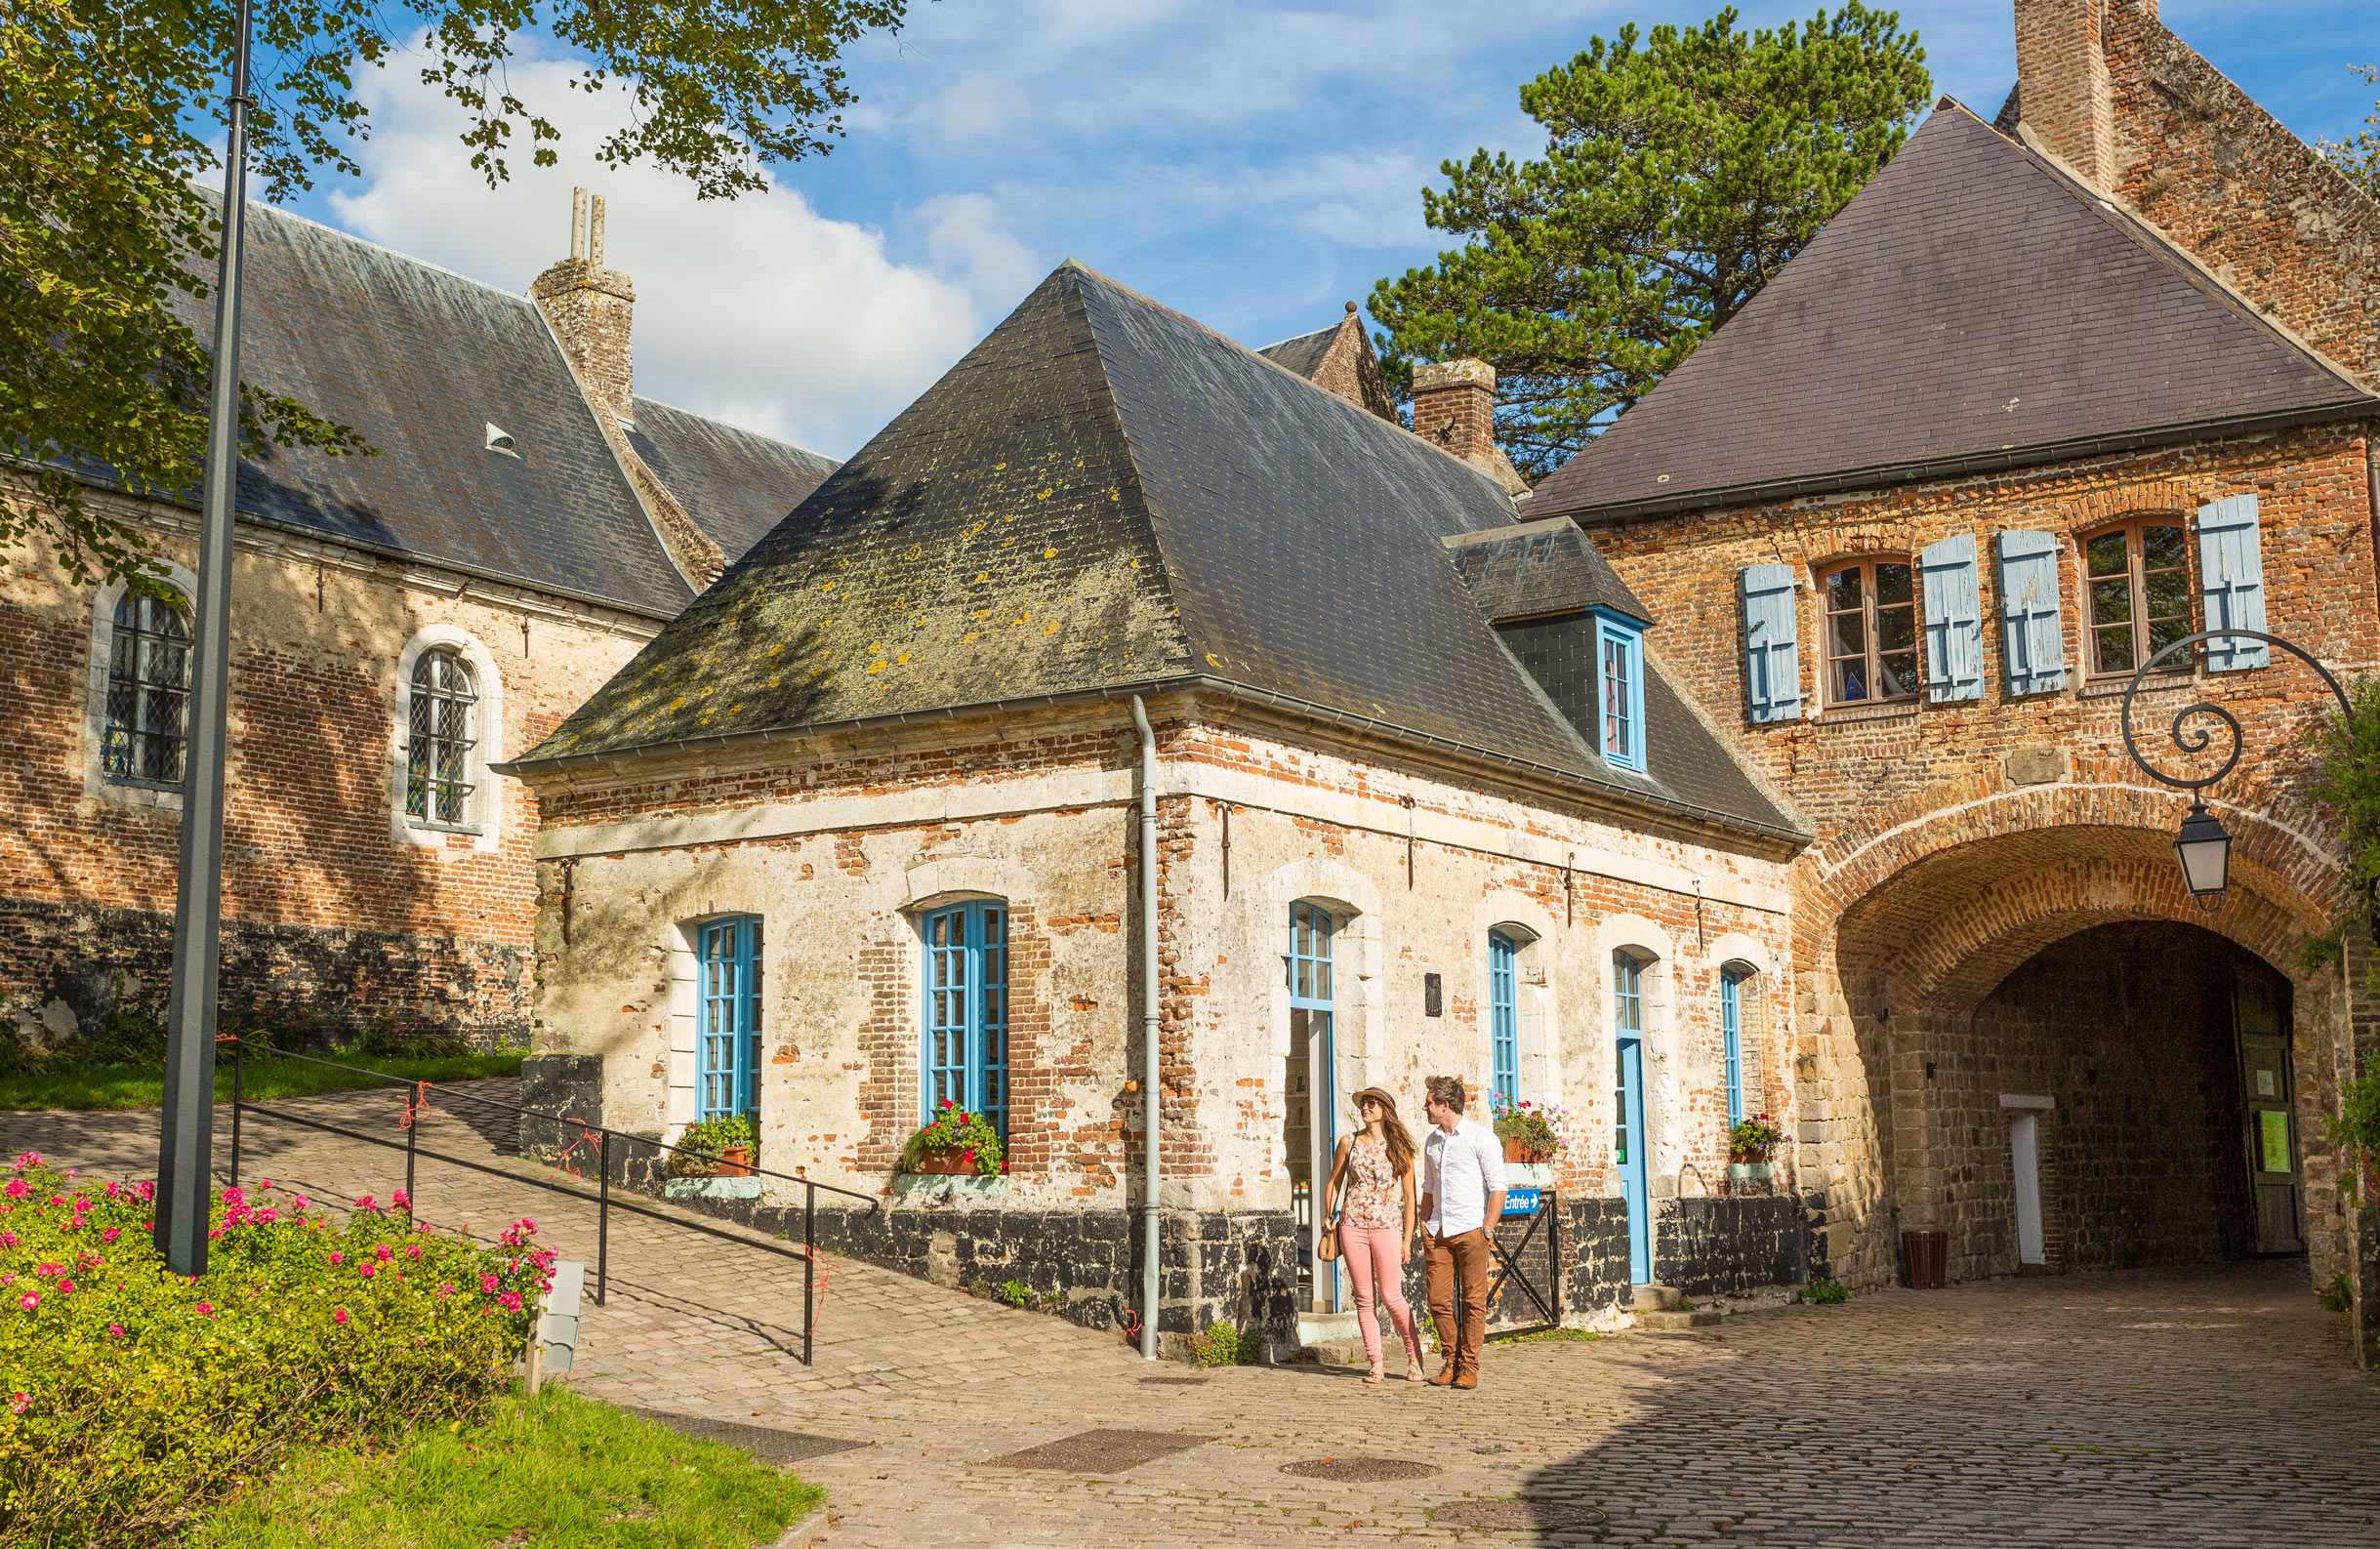 The charming walled town of Montreuil-sur-Mer is within easy reach of Maison de Plumes in Heuchin